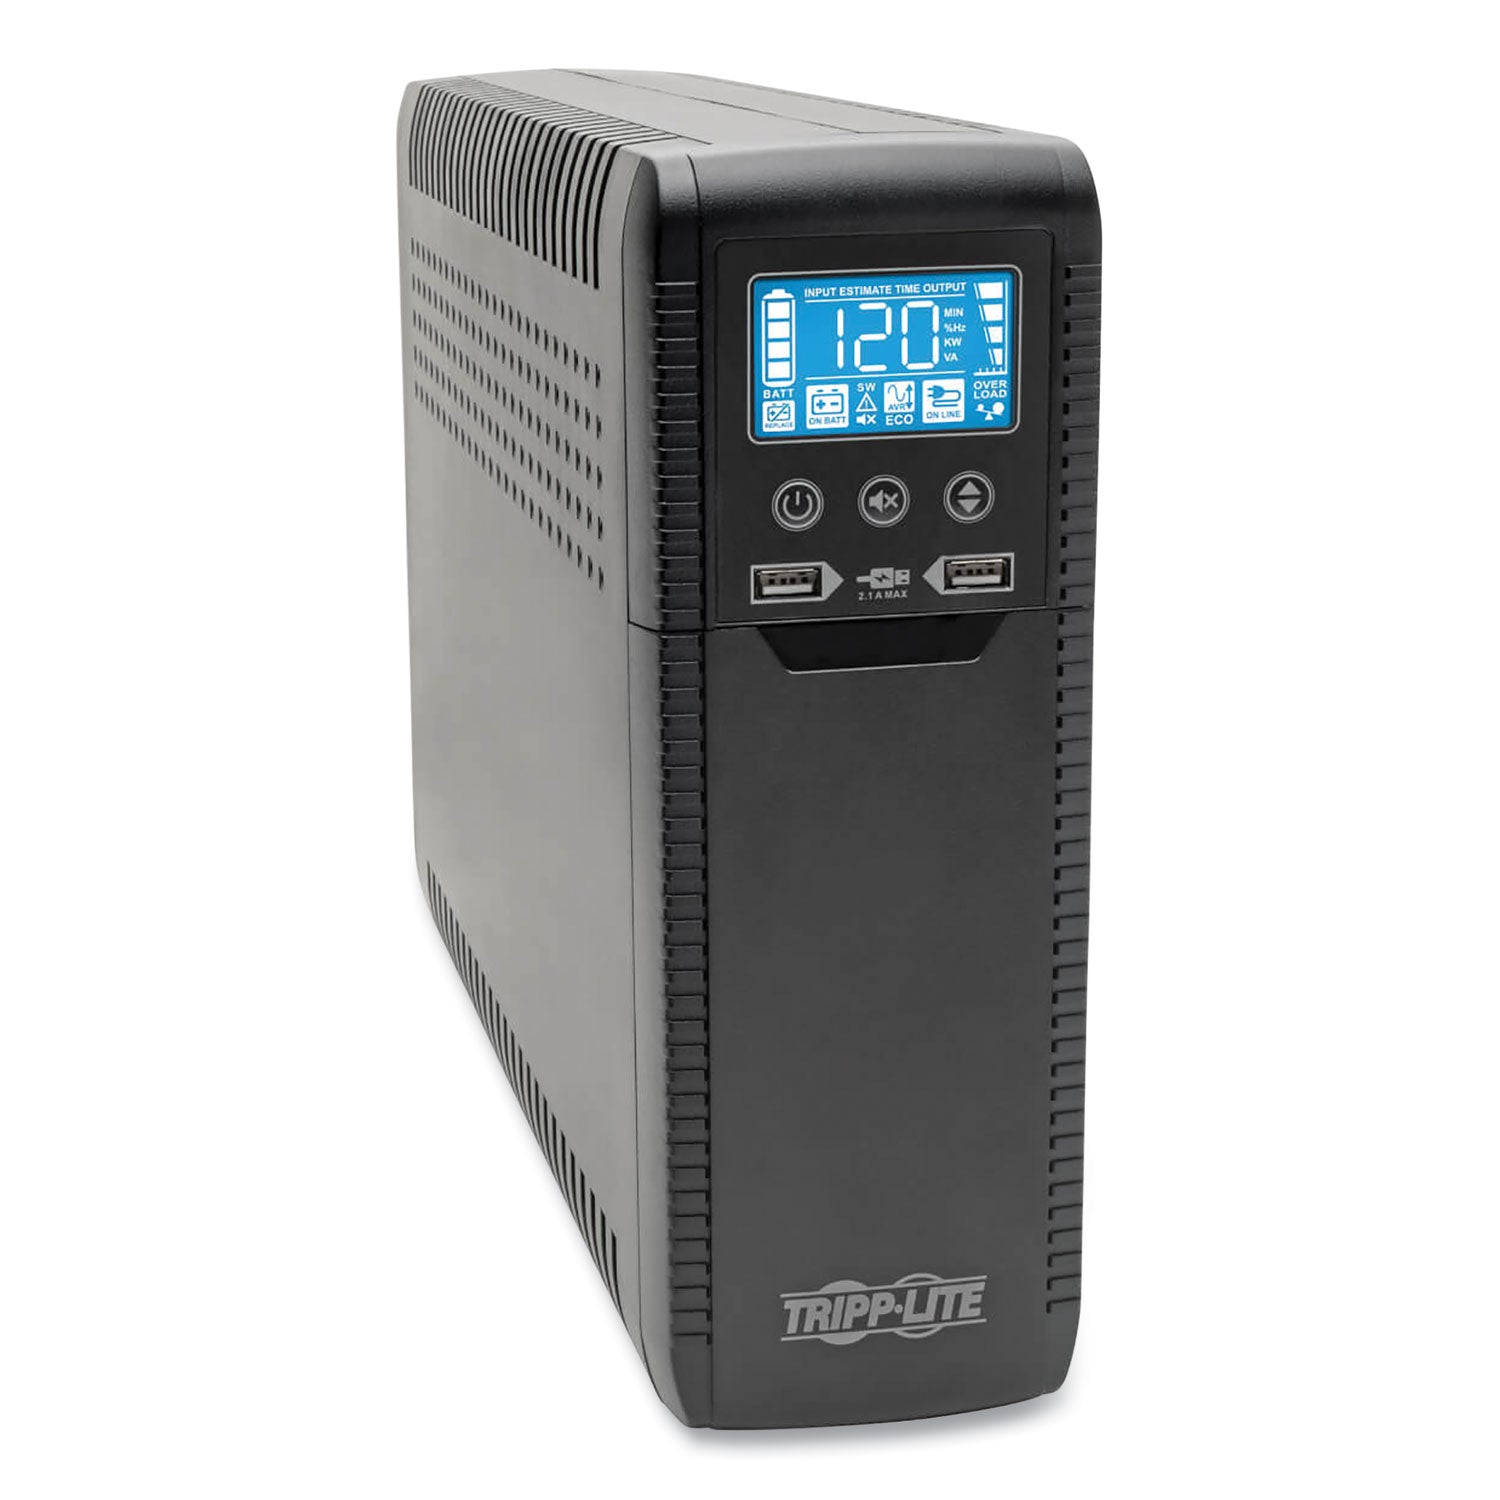 eco-series-desktop-ups-systems-with-usb-monitoring-10-outlets-1440-va-316-j_trpeco1500lcd - 1